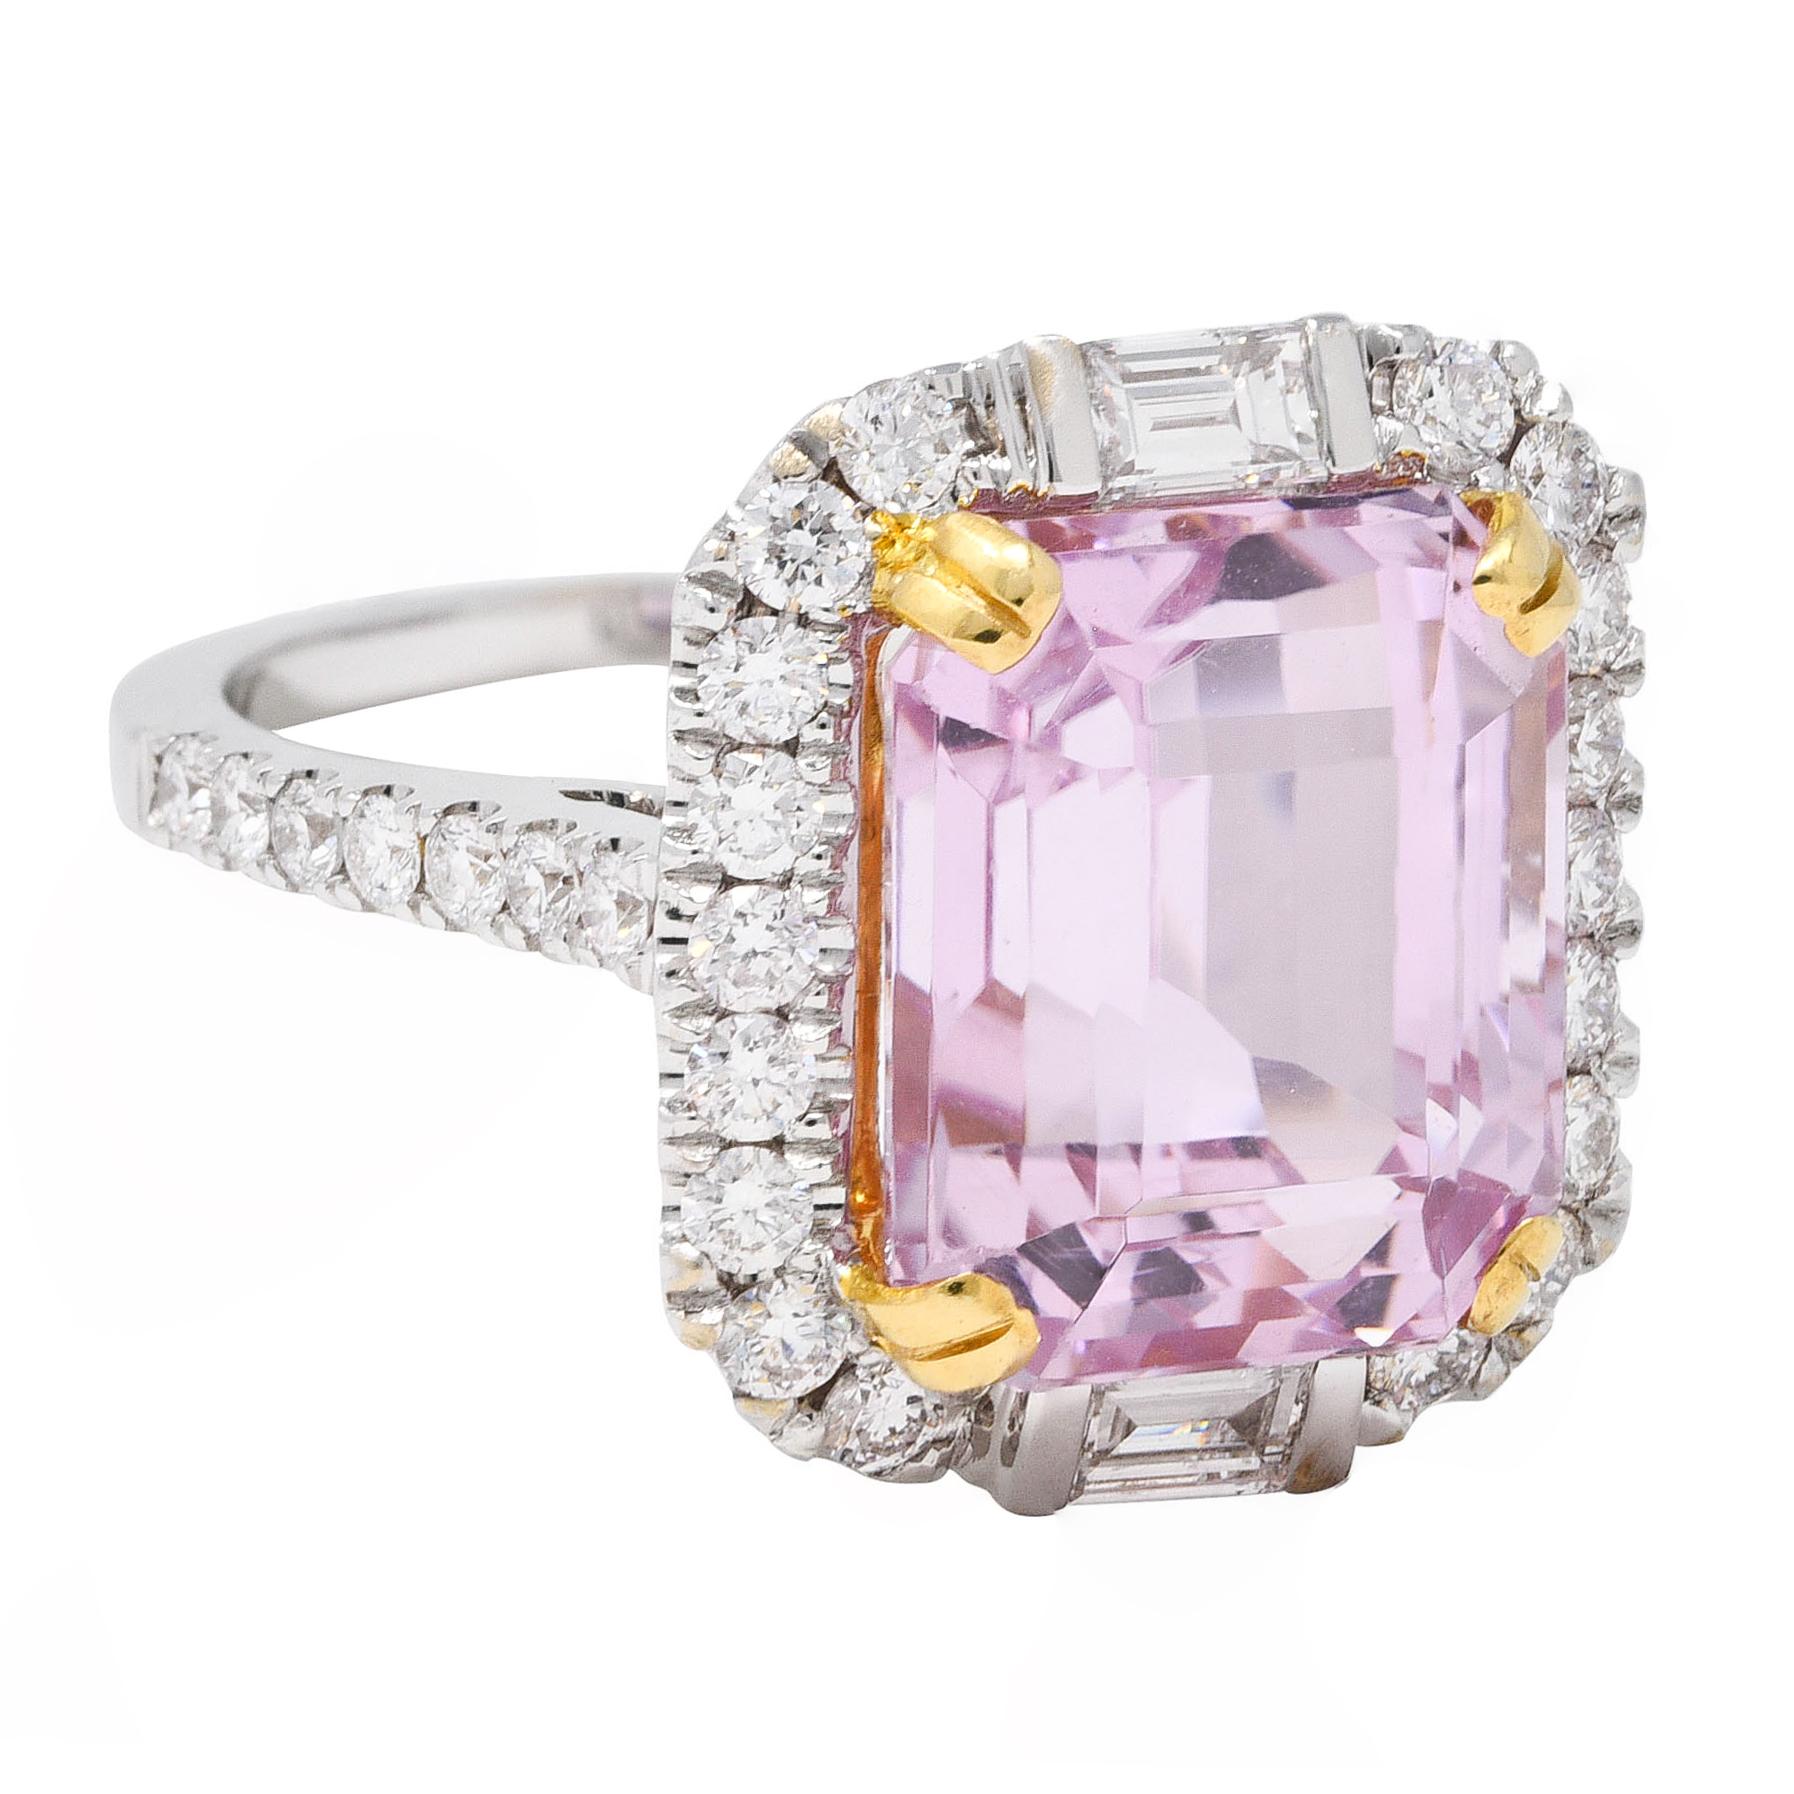 Cluster ring centers a mixed emerald cut kunzite measuring approximately 12.5 x 10.5 mm
Transparent with medium light pink color - emerald cut with unique barrel faceting
Set by split yellow gold prongs and flanked North to South by bar set baguette